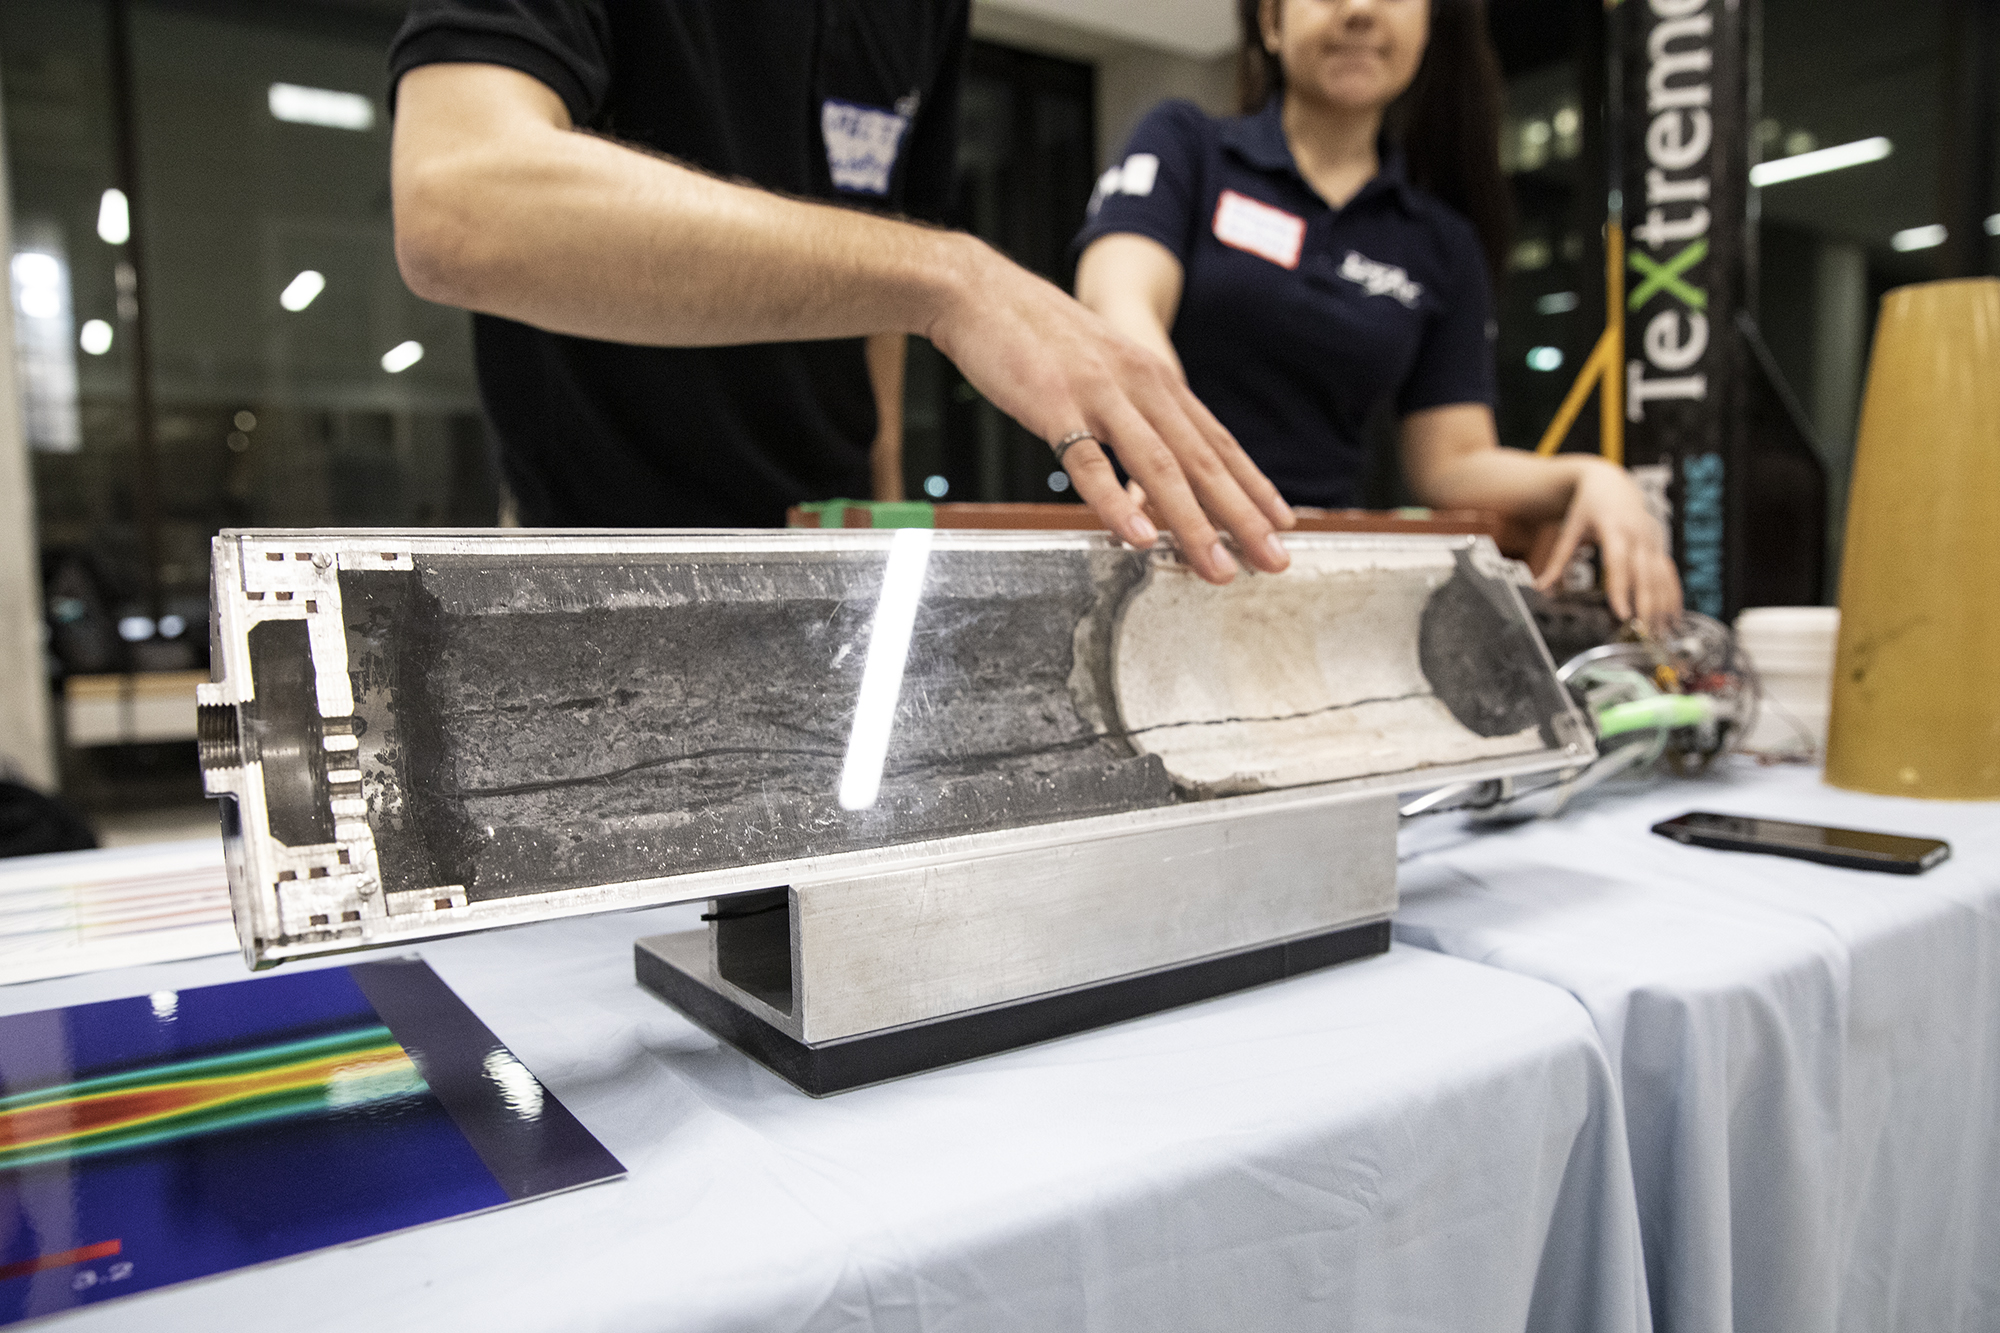 A cross-section of a hybrid engine fuel core lets students visualize the inside of a rocket. (Credit: Erica Rae Chong)